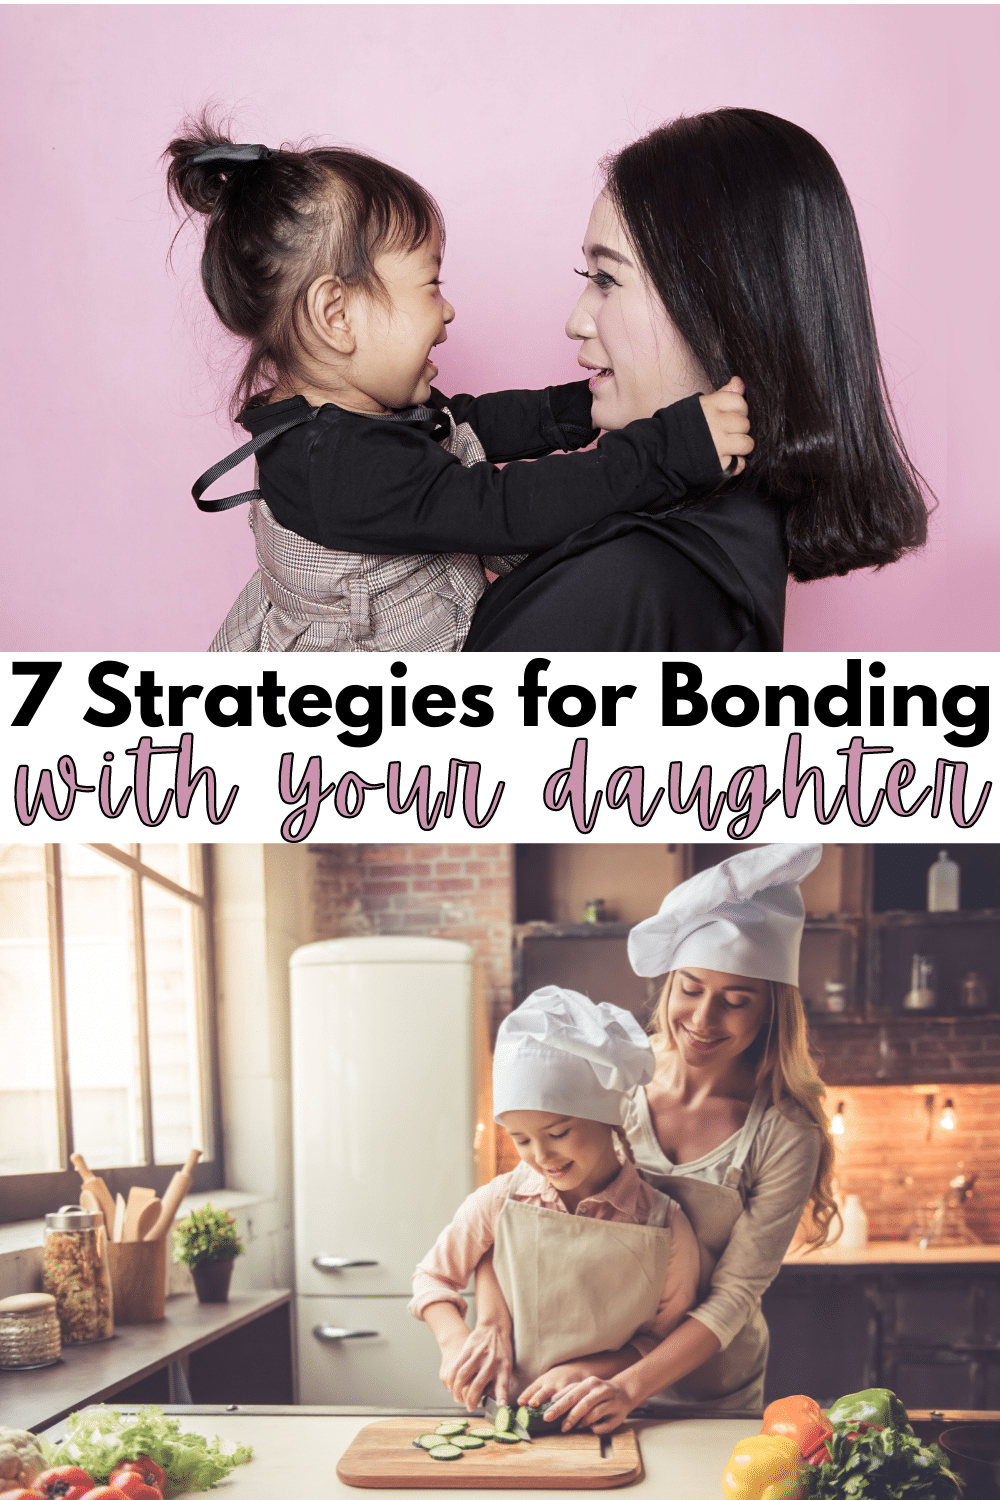 A mother & daughter relationship is special. Here are simple strategies for bonding with your daughter to make the most of that relationship. #motherdaughterrelationship #motherdaughter #momlife via @wondermomwannab